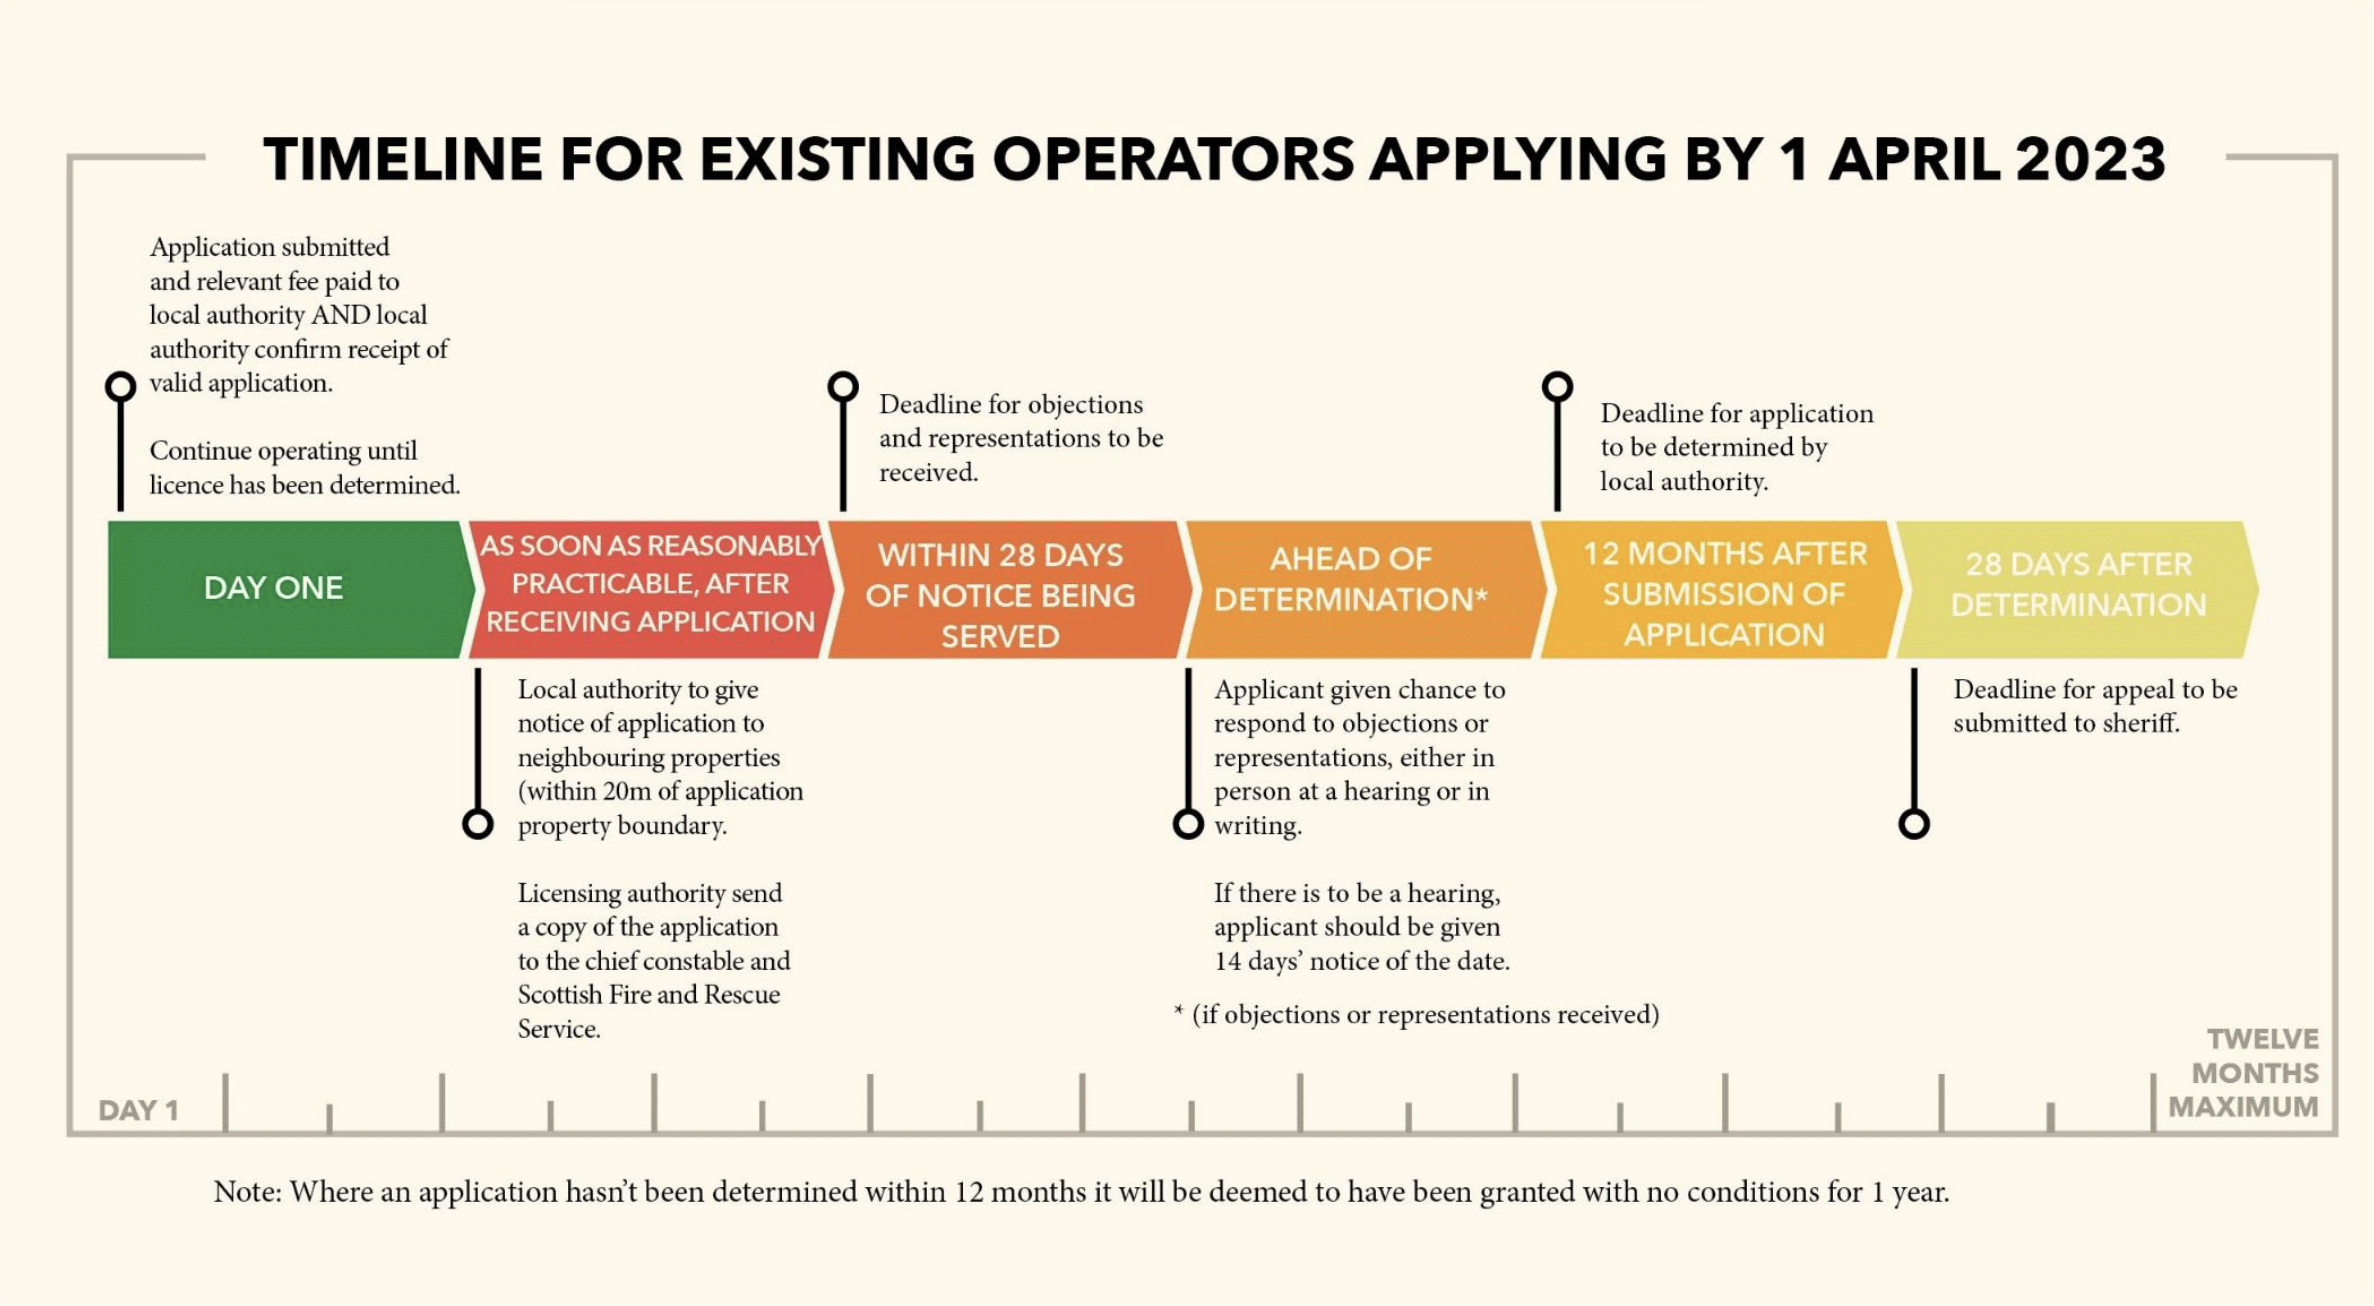 Diagram showing the timeline for determining an application for existing operators applying before 1 April 2023.